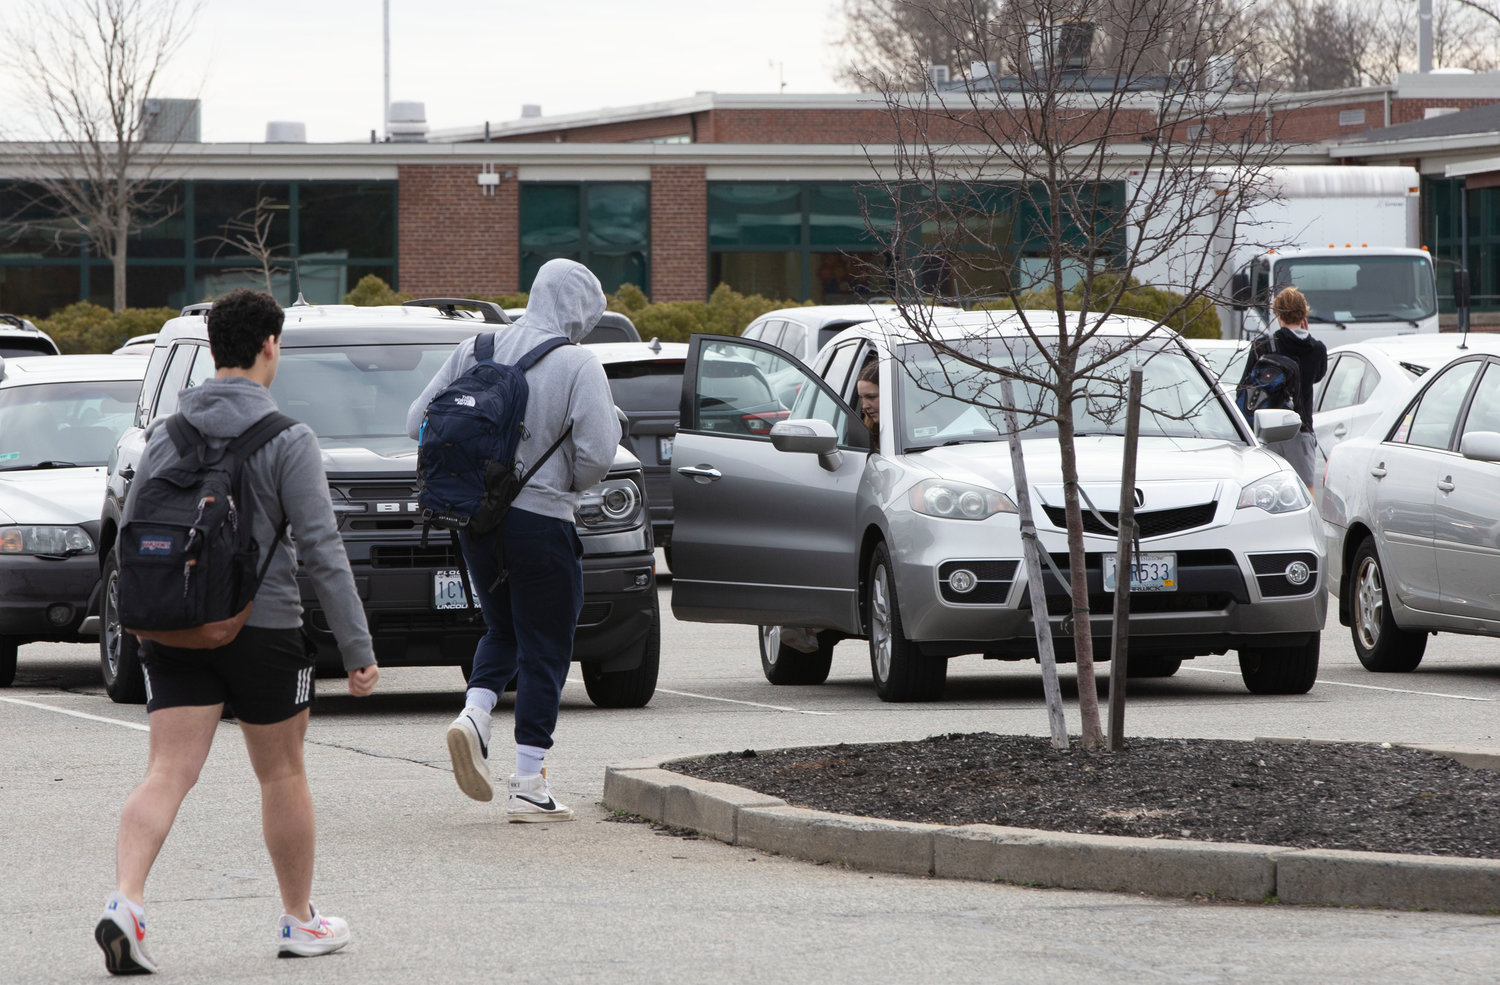 Students navigate the parking lot on foot while cars jockey for spaces.